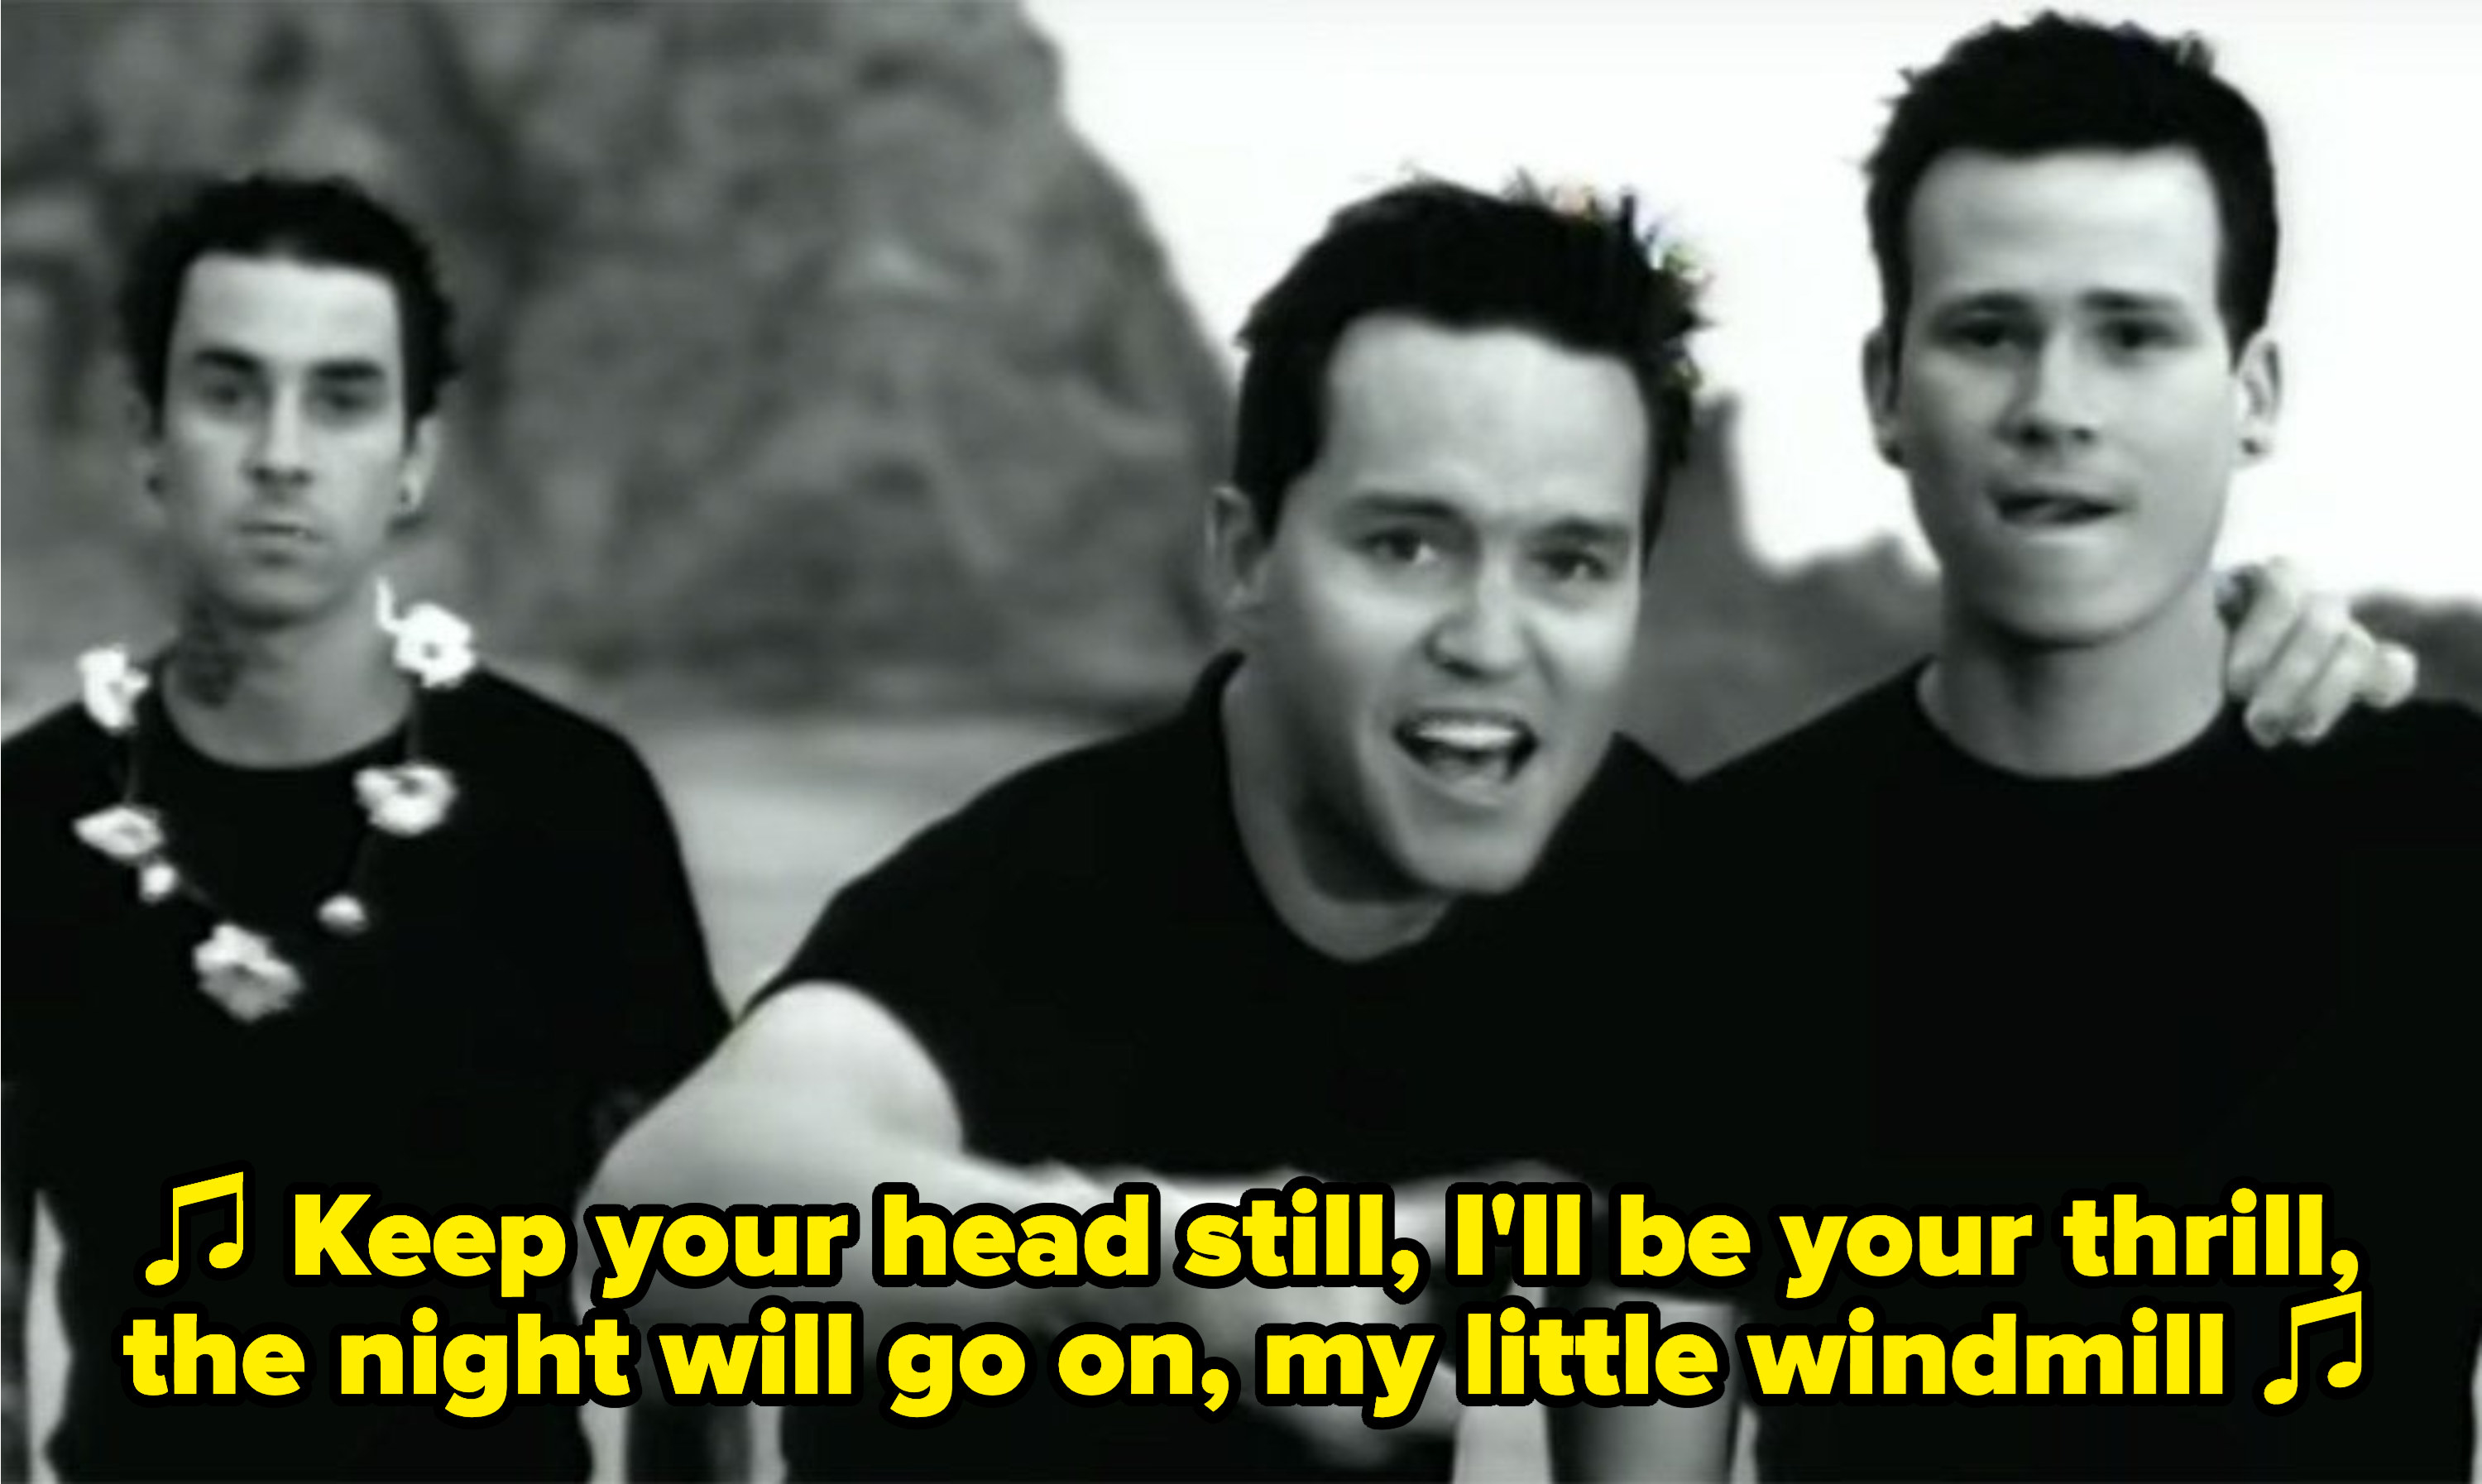 Blink-182 singing: &quot;Keep your head still, I&#x27;ll be your thrill, the night will go on, my little windmill&quot;